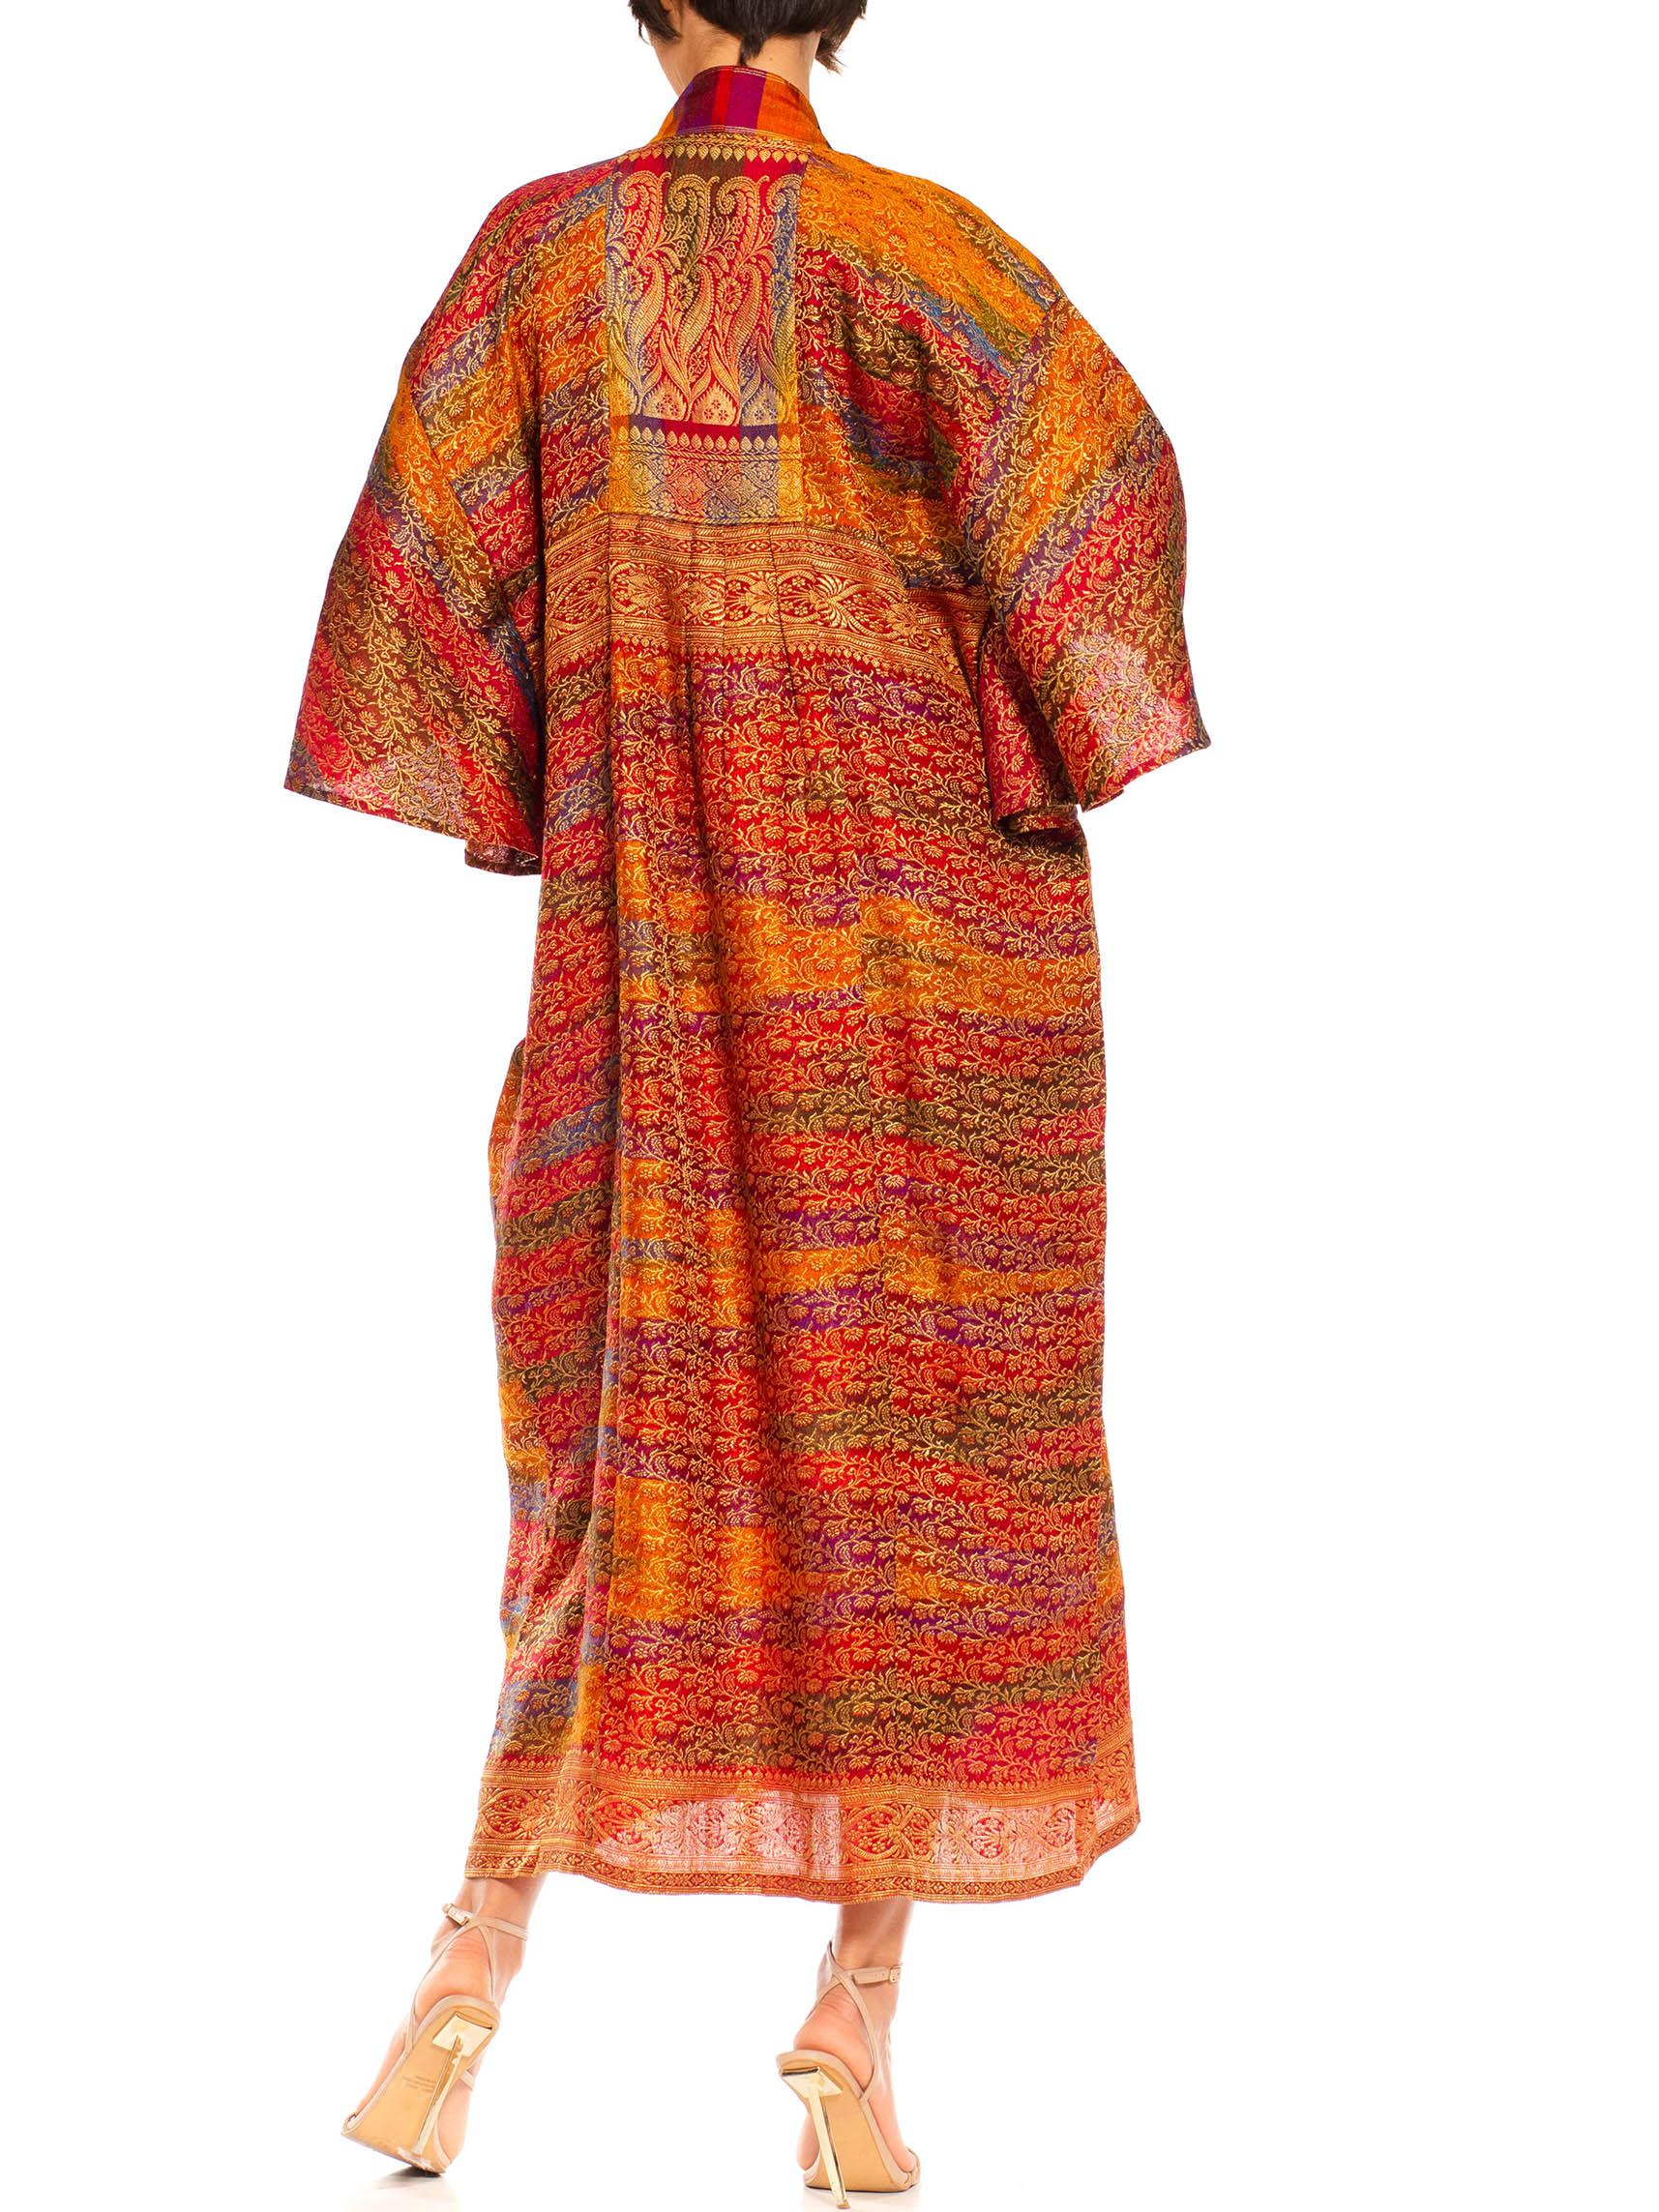 MORPHEW COLLECTION Multicolor & Metallic Gold Silk Paisley Kaftan Made From Vin For Sale 1